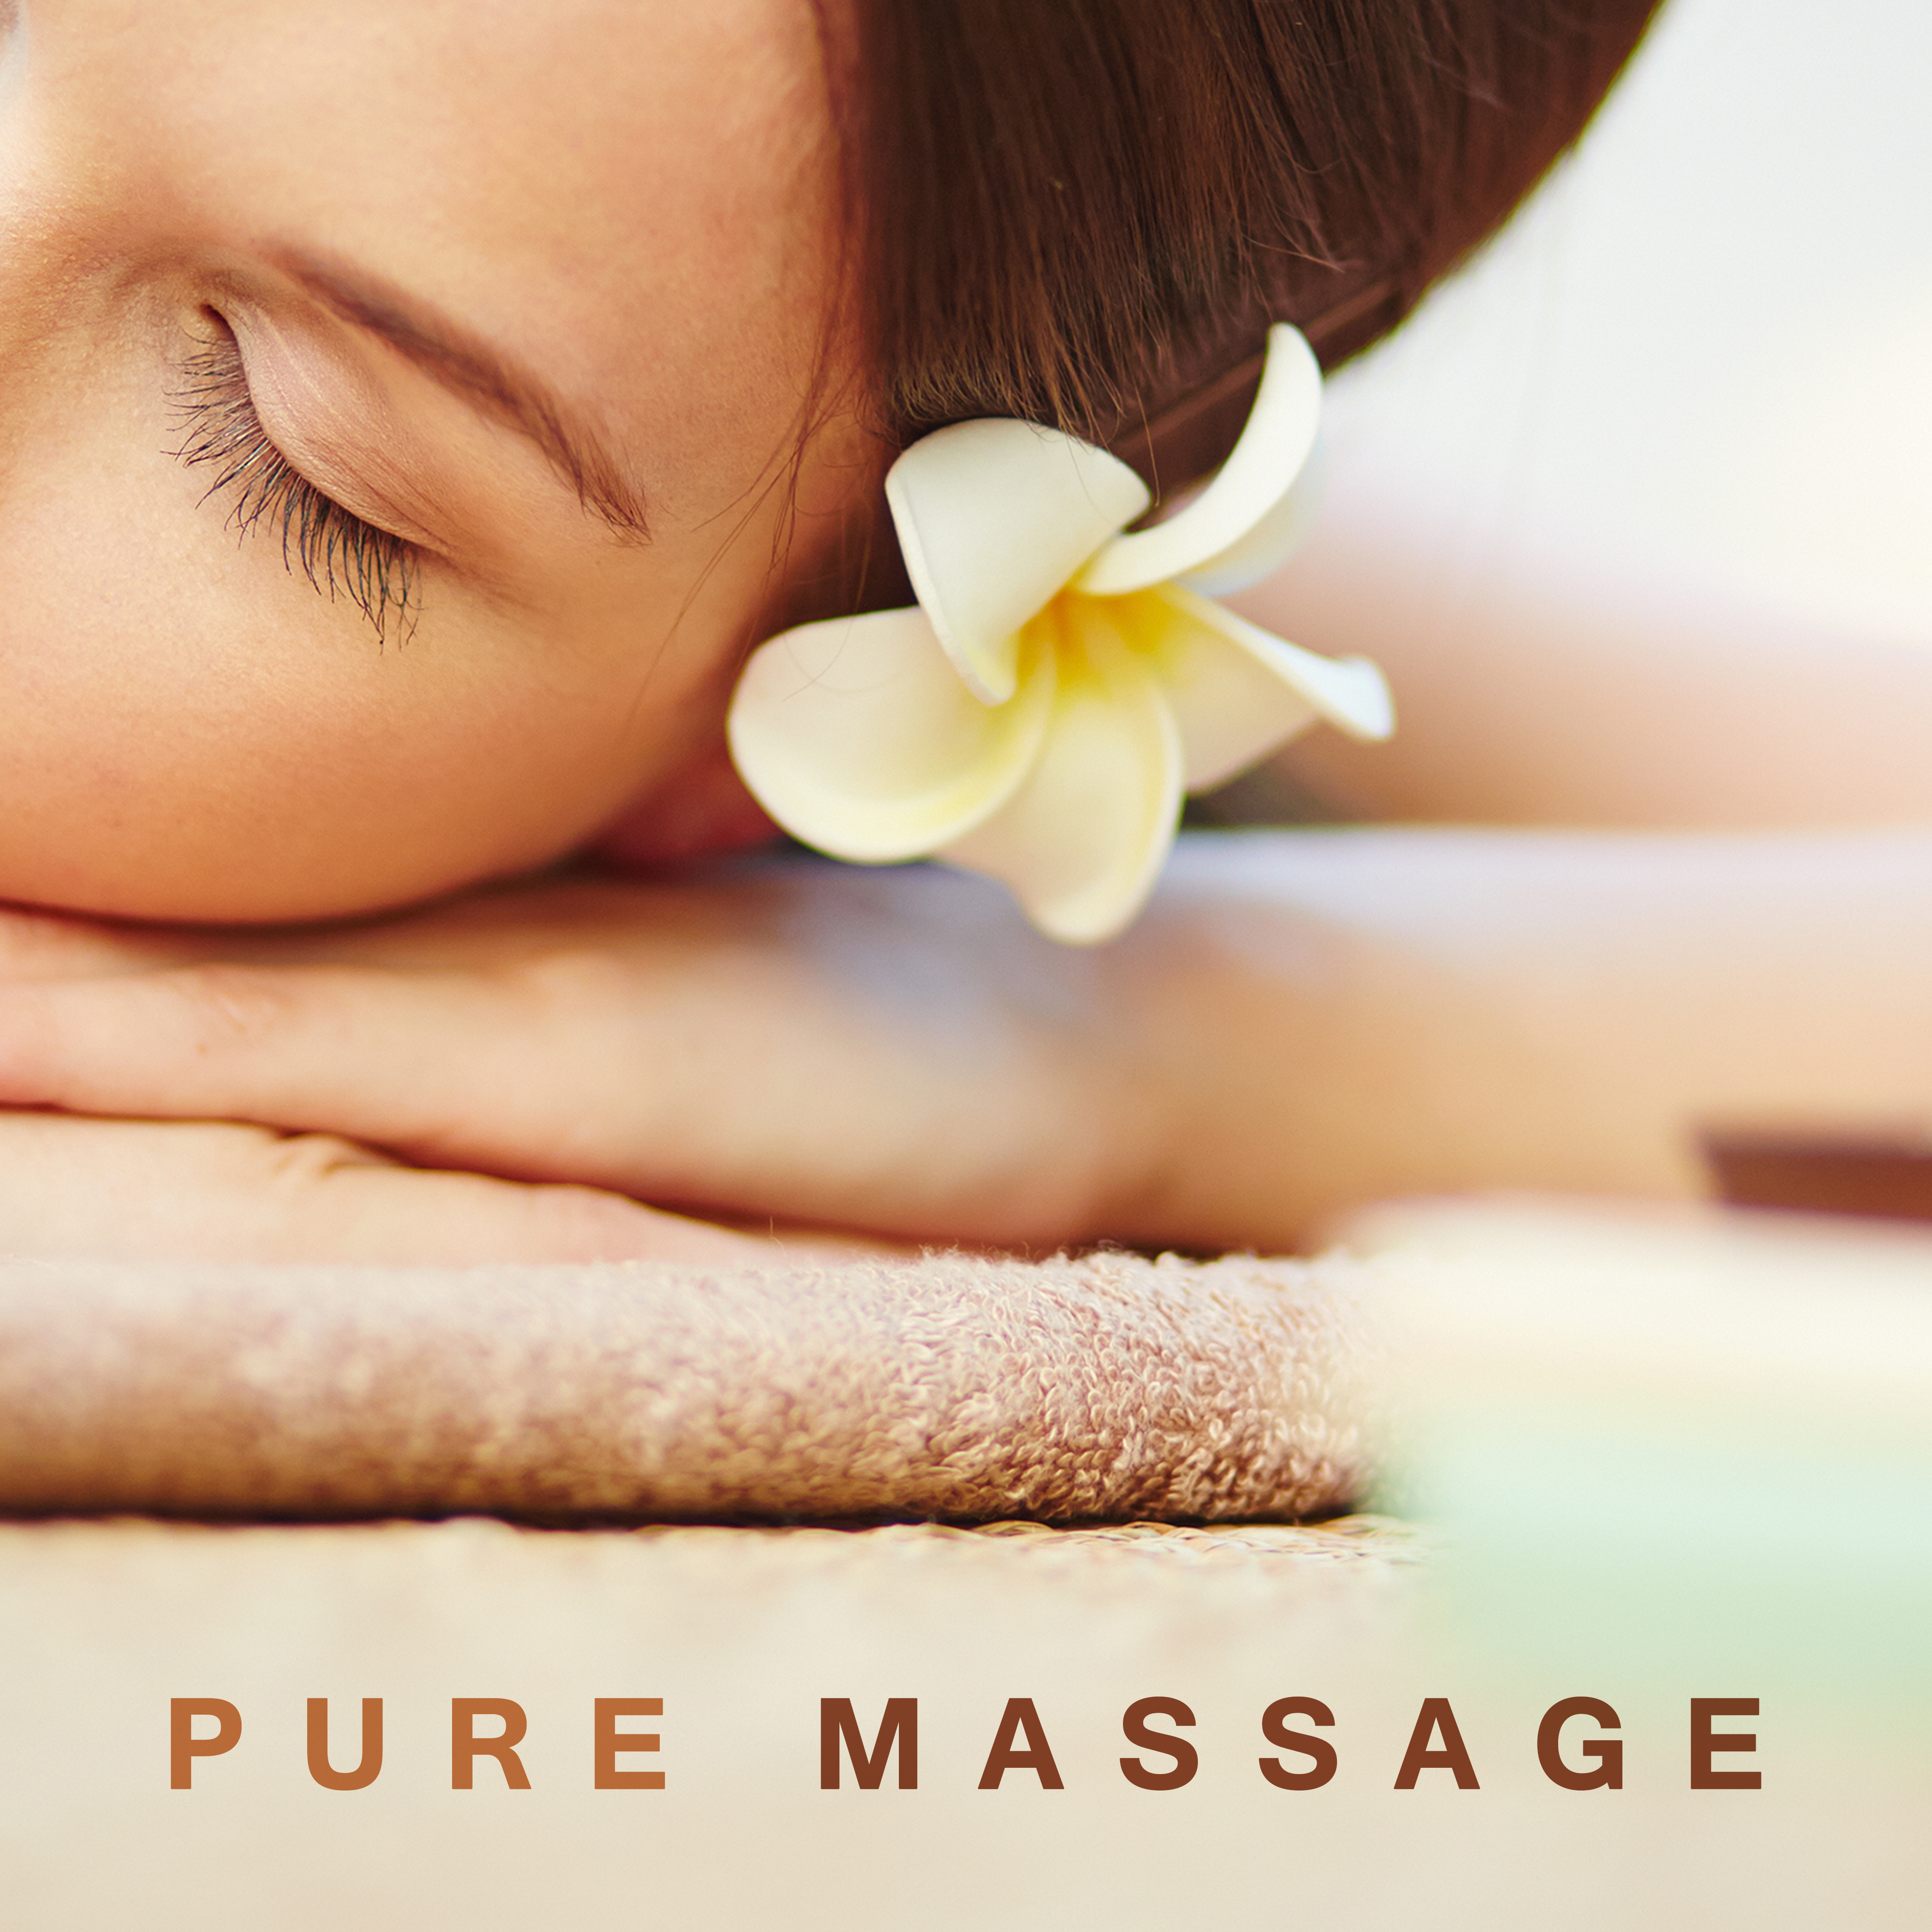 Pure Massage  New Age Sounds, Music for Massage, Spa, Wellness, Relaxation, Natural Melodies, Zen, Rest